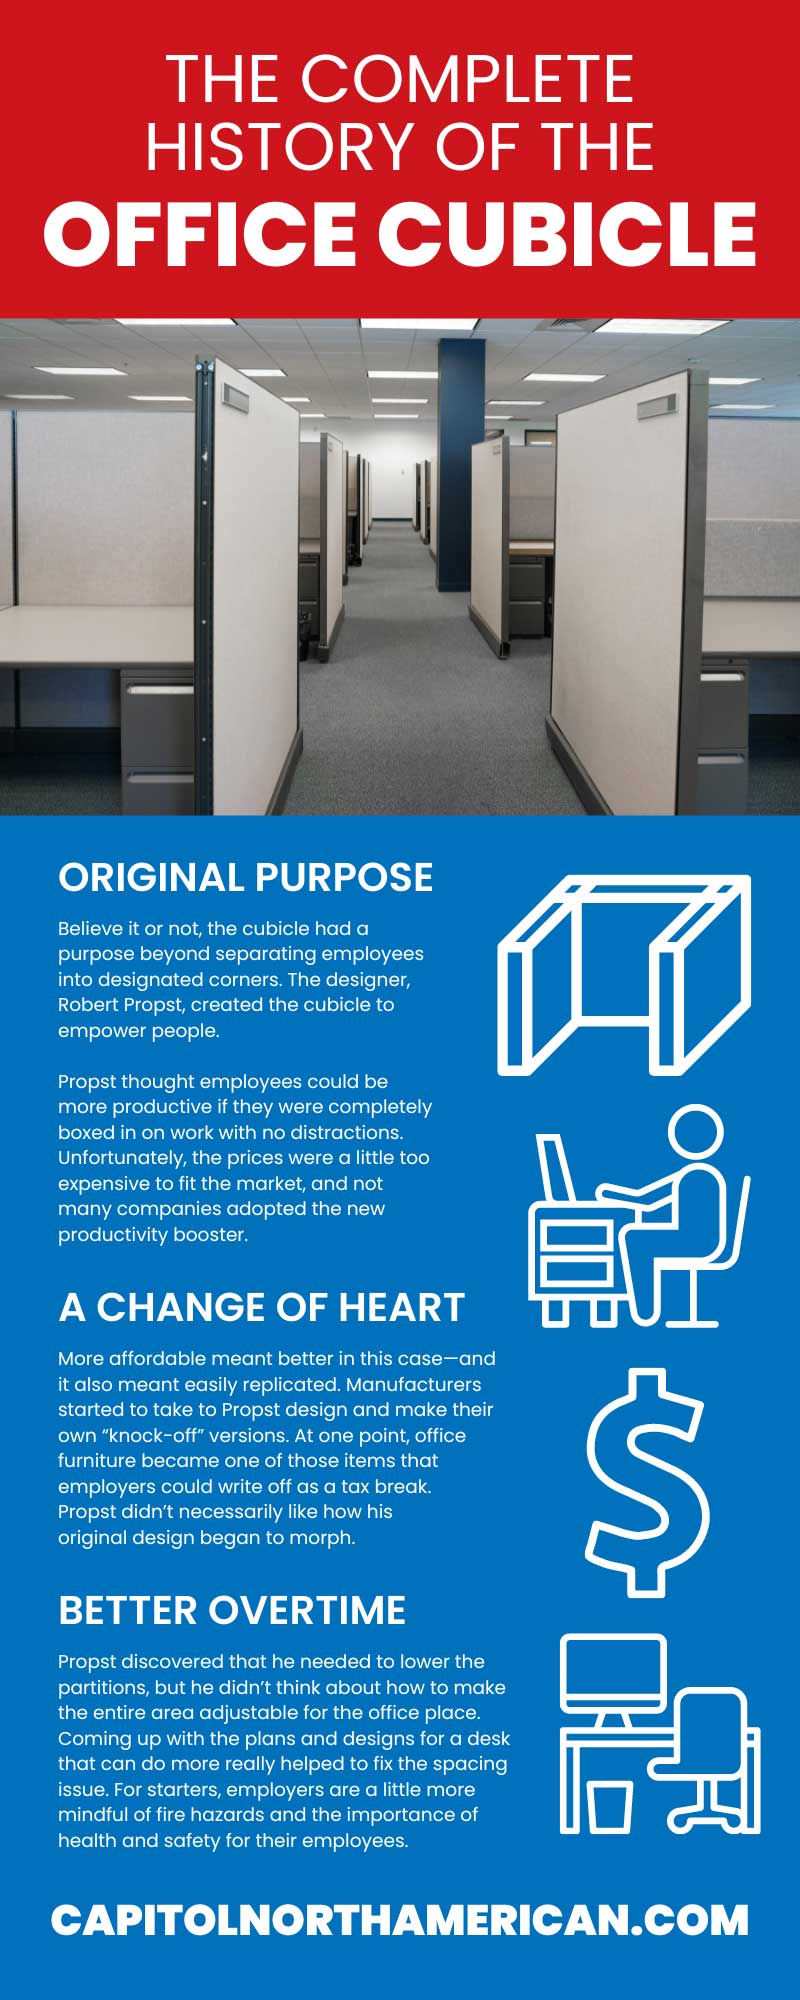 The Complete History of the Office Cubicle